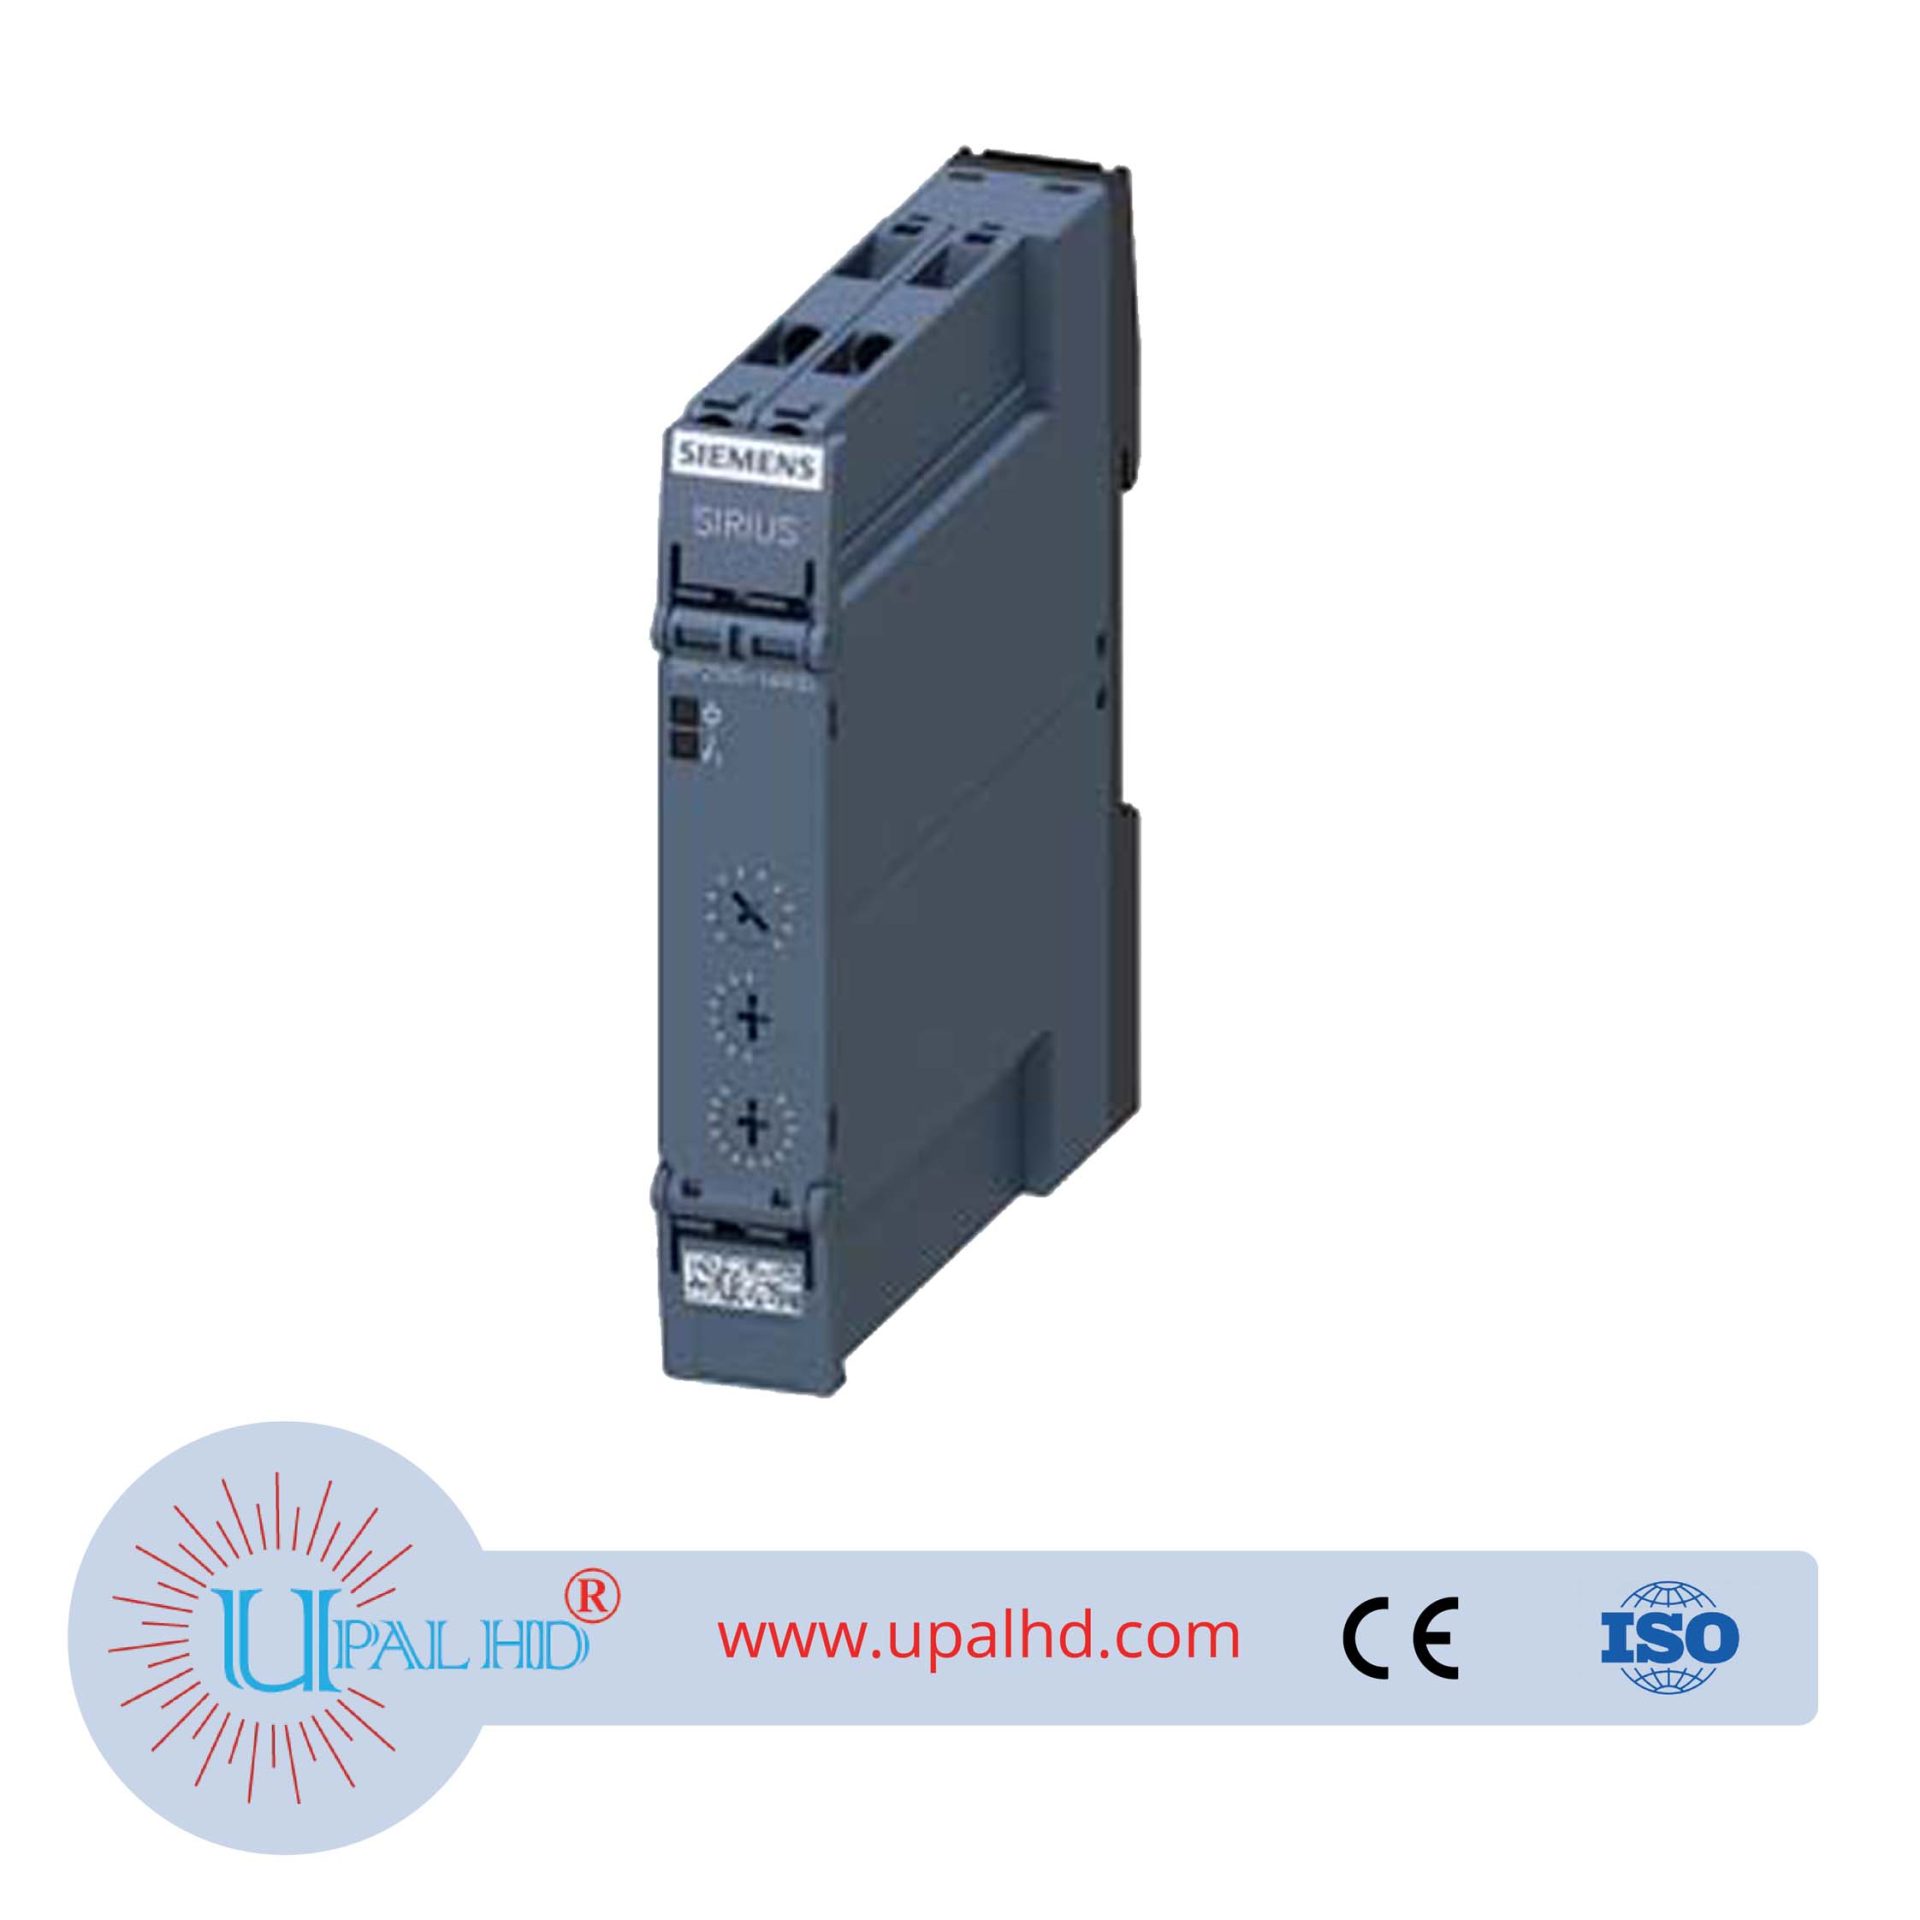 Time relay, response delay, 2 switching contacts, 7 time ranges, 0.05s-100h, AC/DC 12-240V